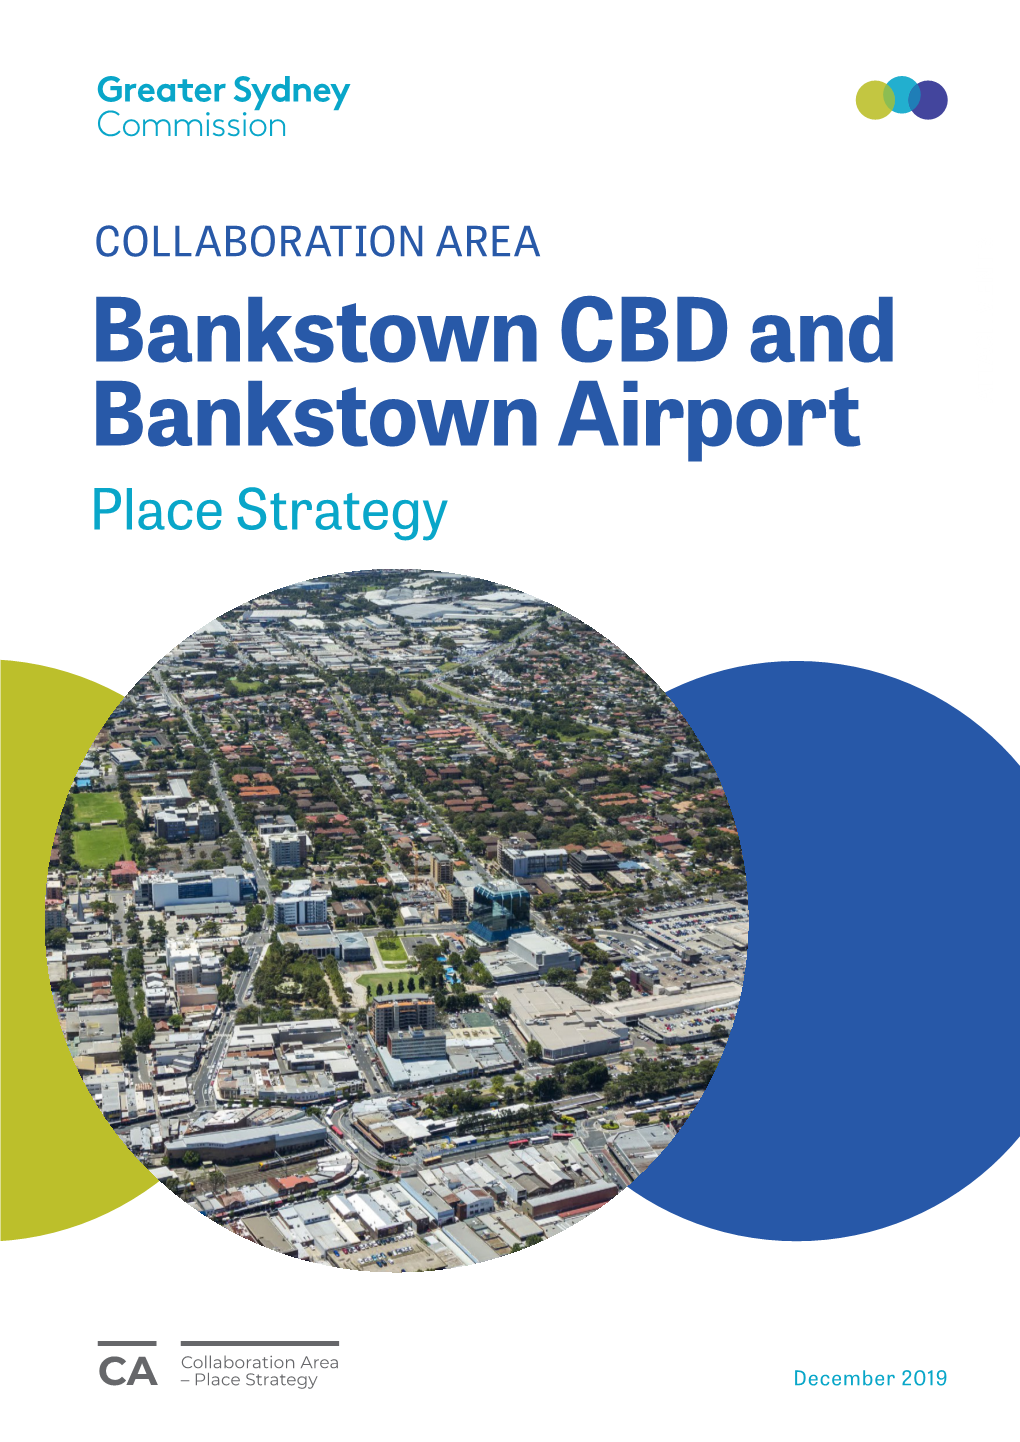 COLLABORATION AREA Bankstown CBD and Bankstown Airport 3 ATTACHMENT Place Strategy